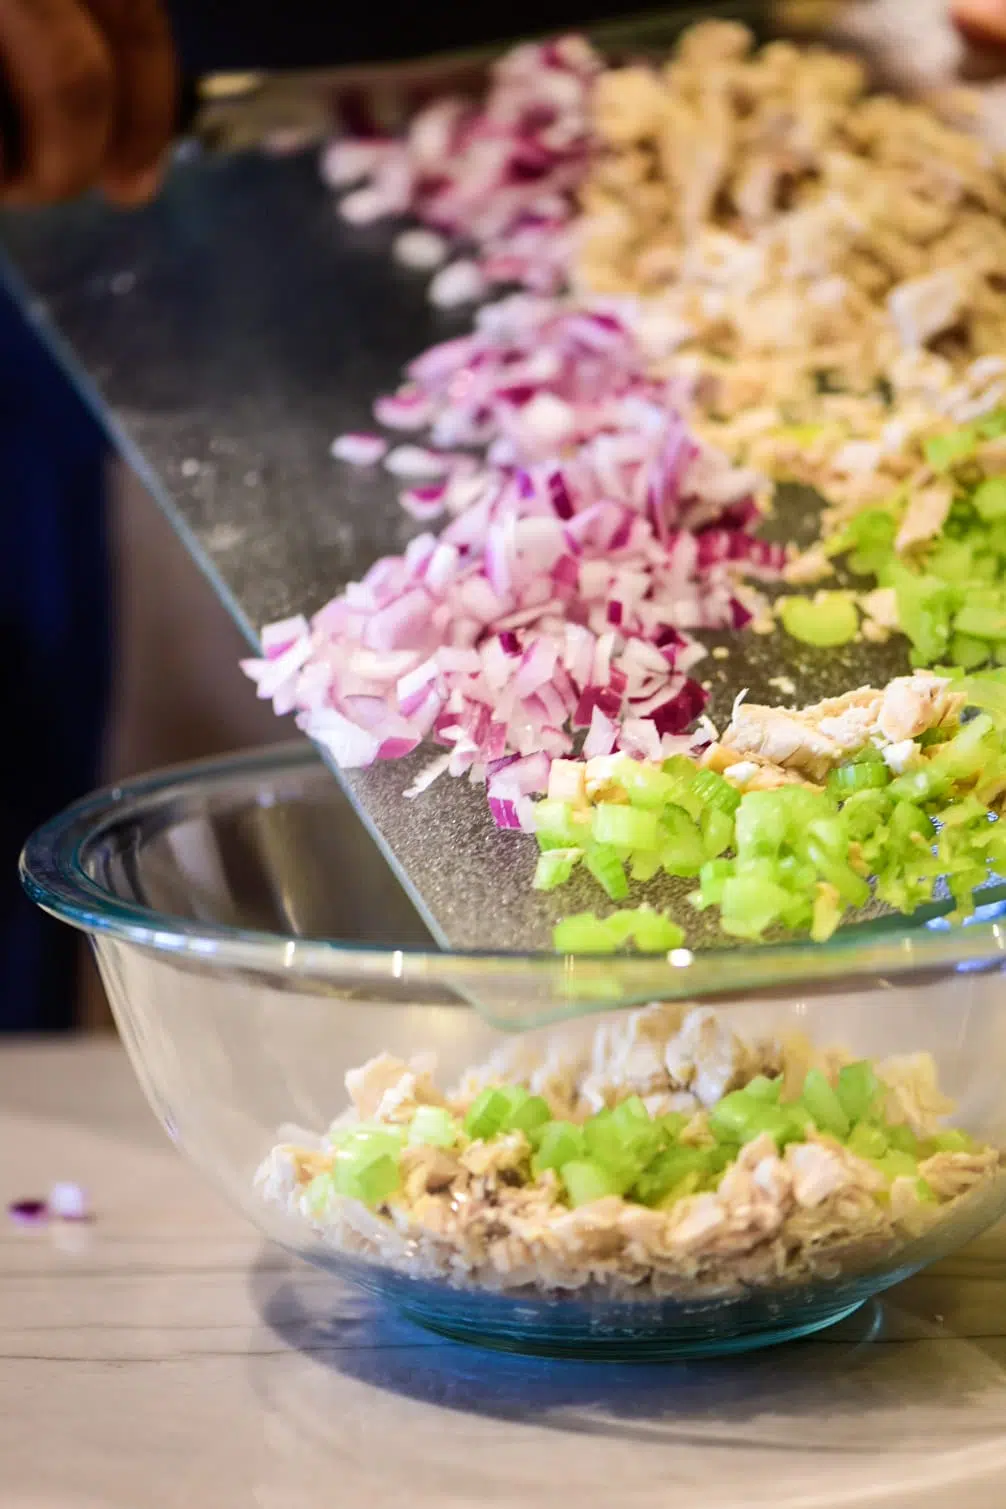 Adding chicken salad ingredients to a large bowl